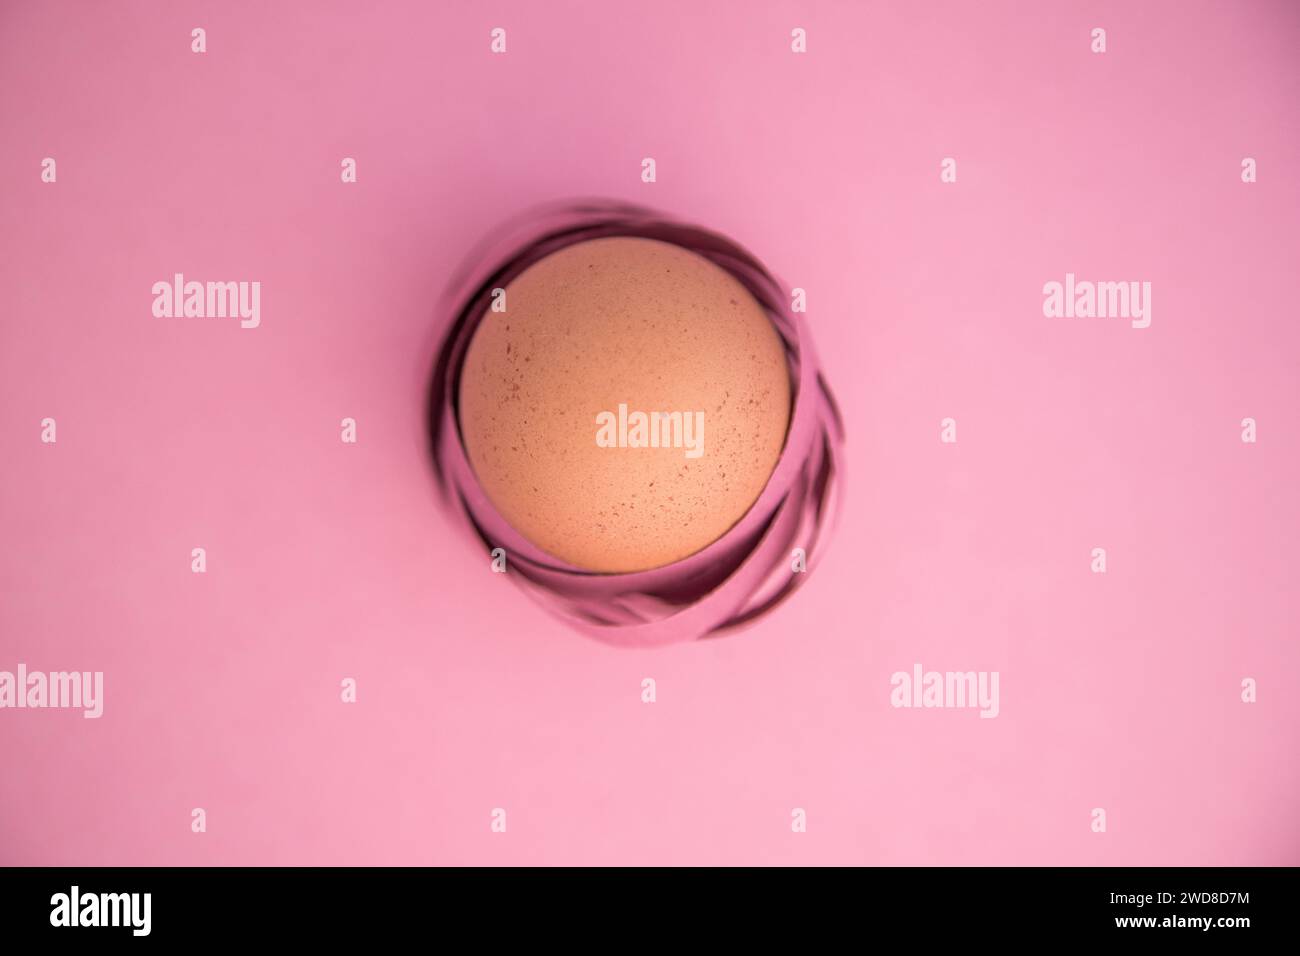 Happy Easter. Minimalist close-up of an egg wrapped in colored ribbons as if it were a nest. Isolated on pink background. Stock Photo